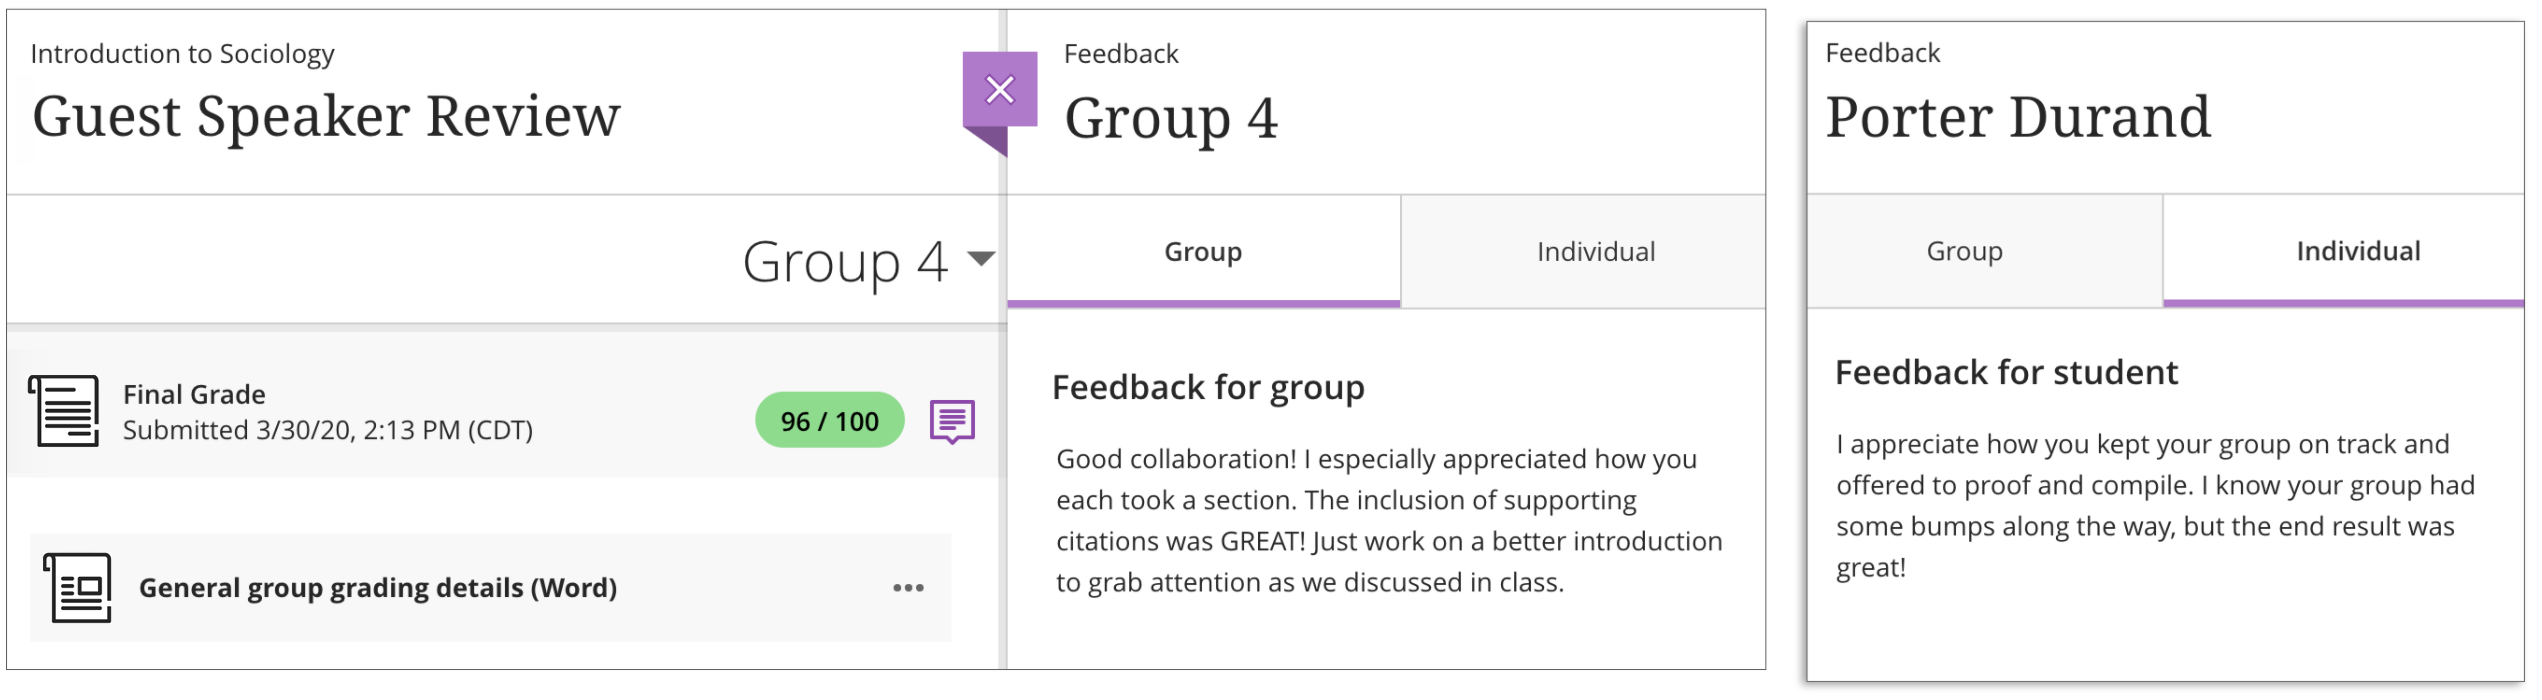 An example group submission from the Student's view is open with the "Group" and "Individual" feedback tabs displayed.